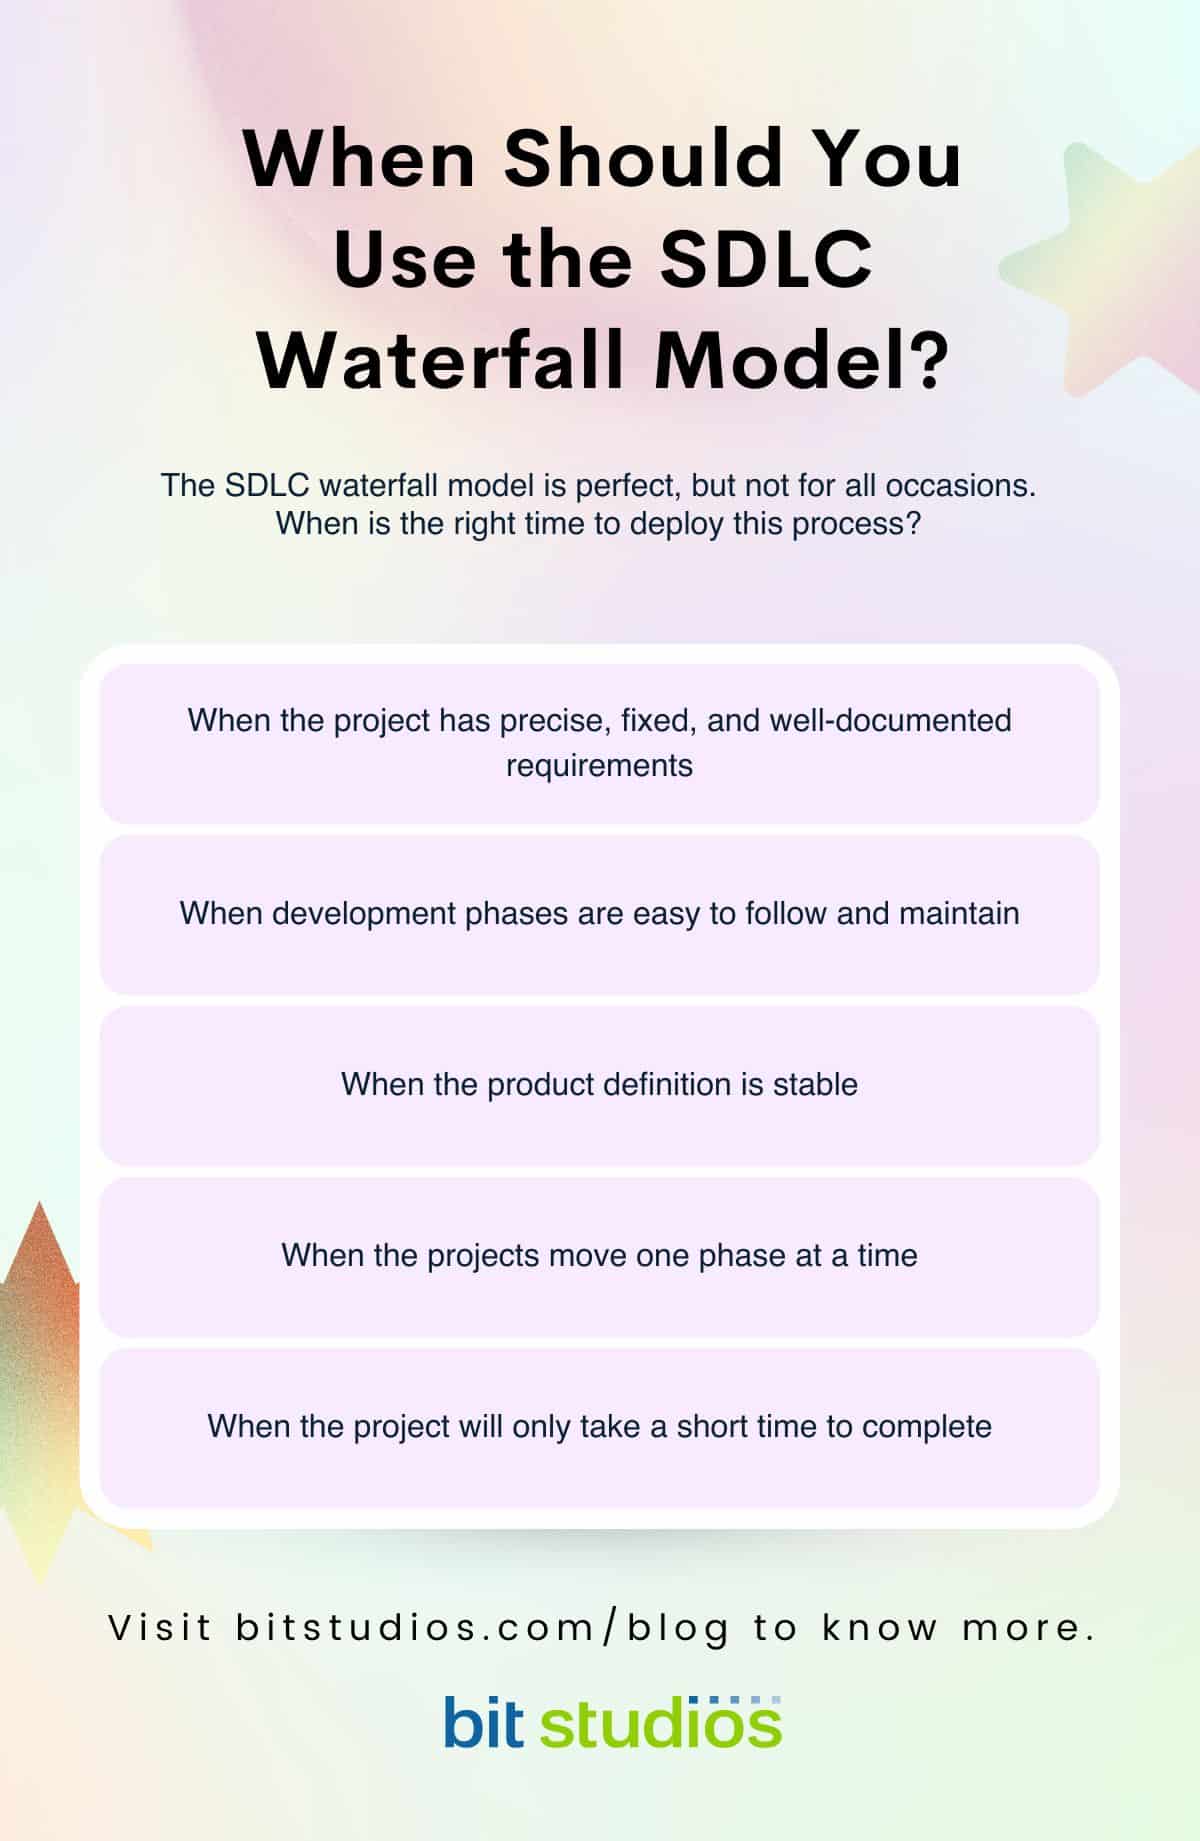 When Should You Use the SDLC Waterfall Model?